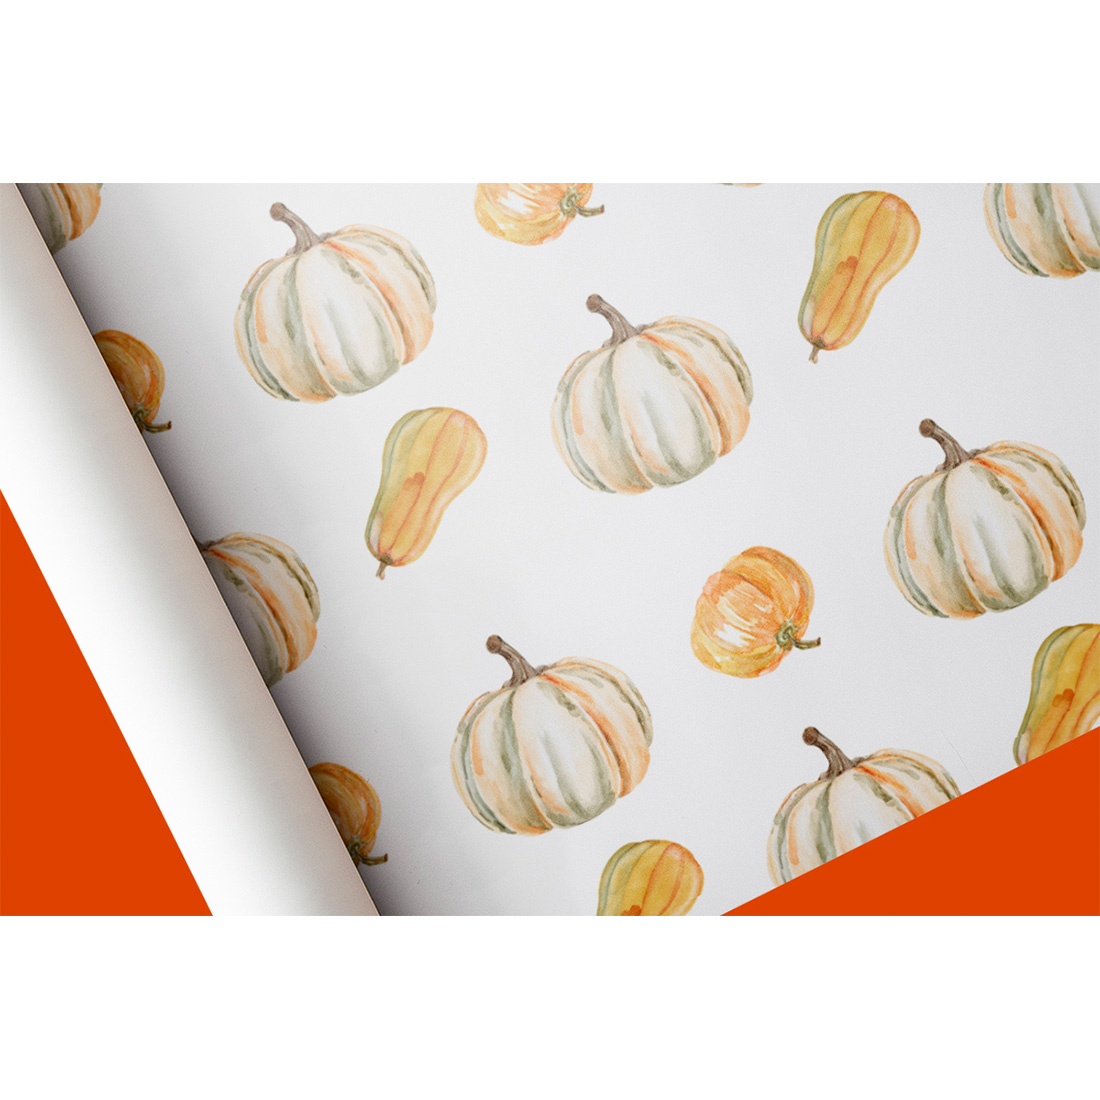 Image with colorful patterns with pumpkin